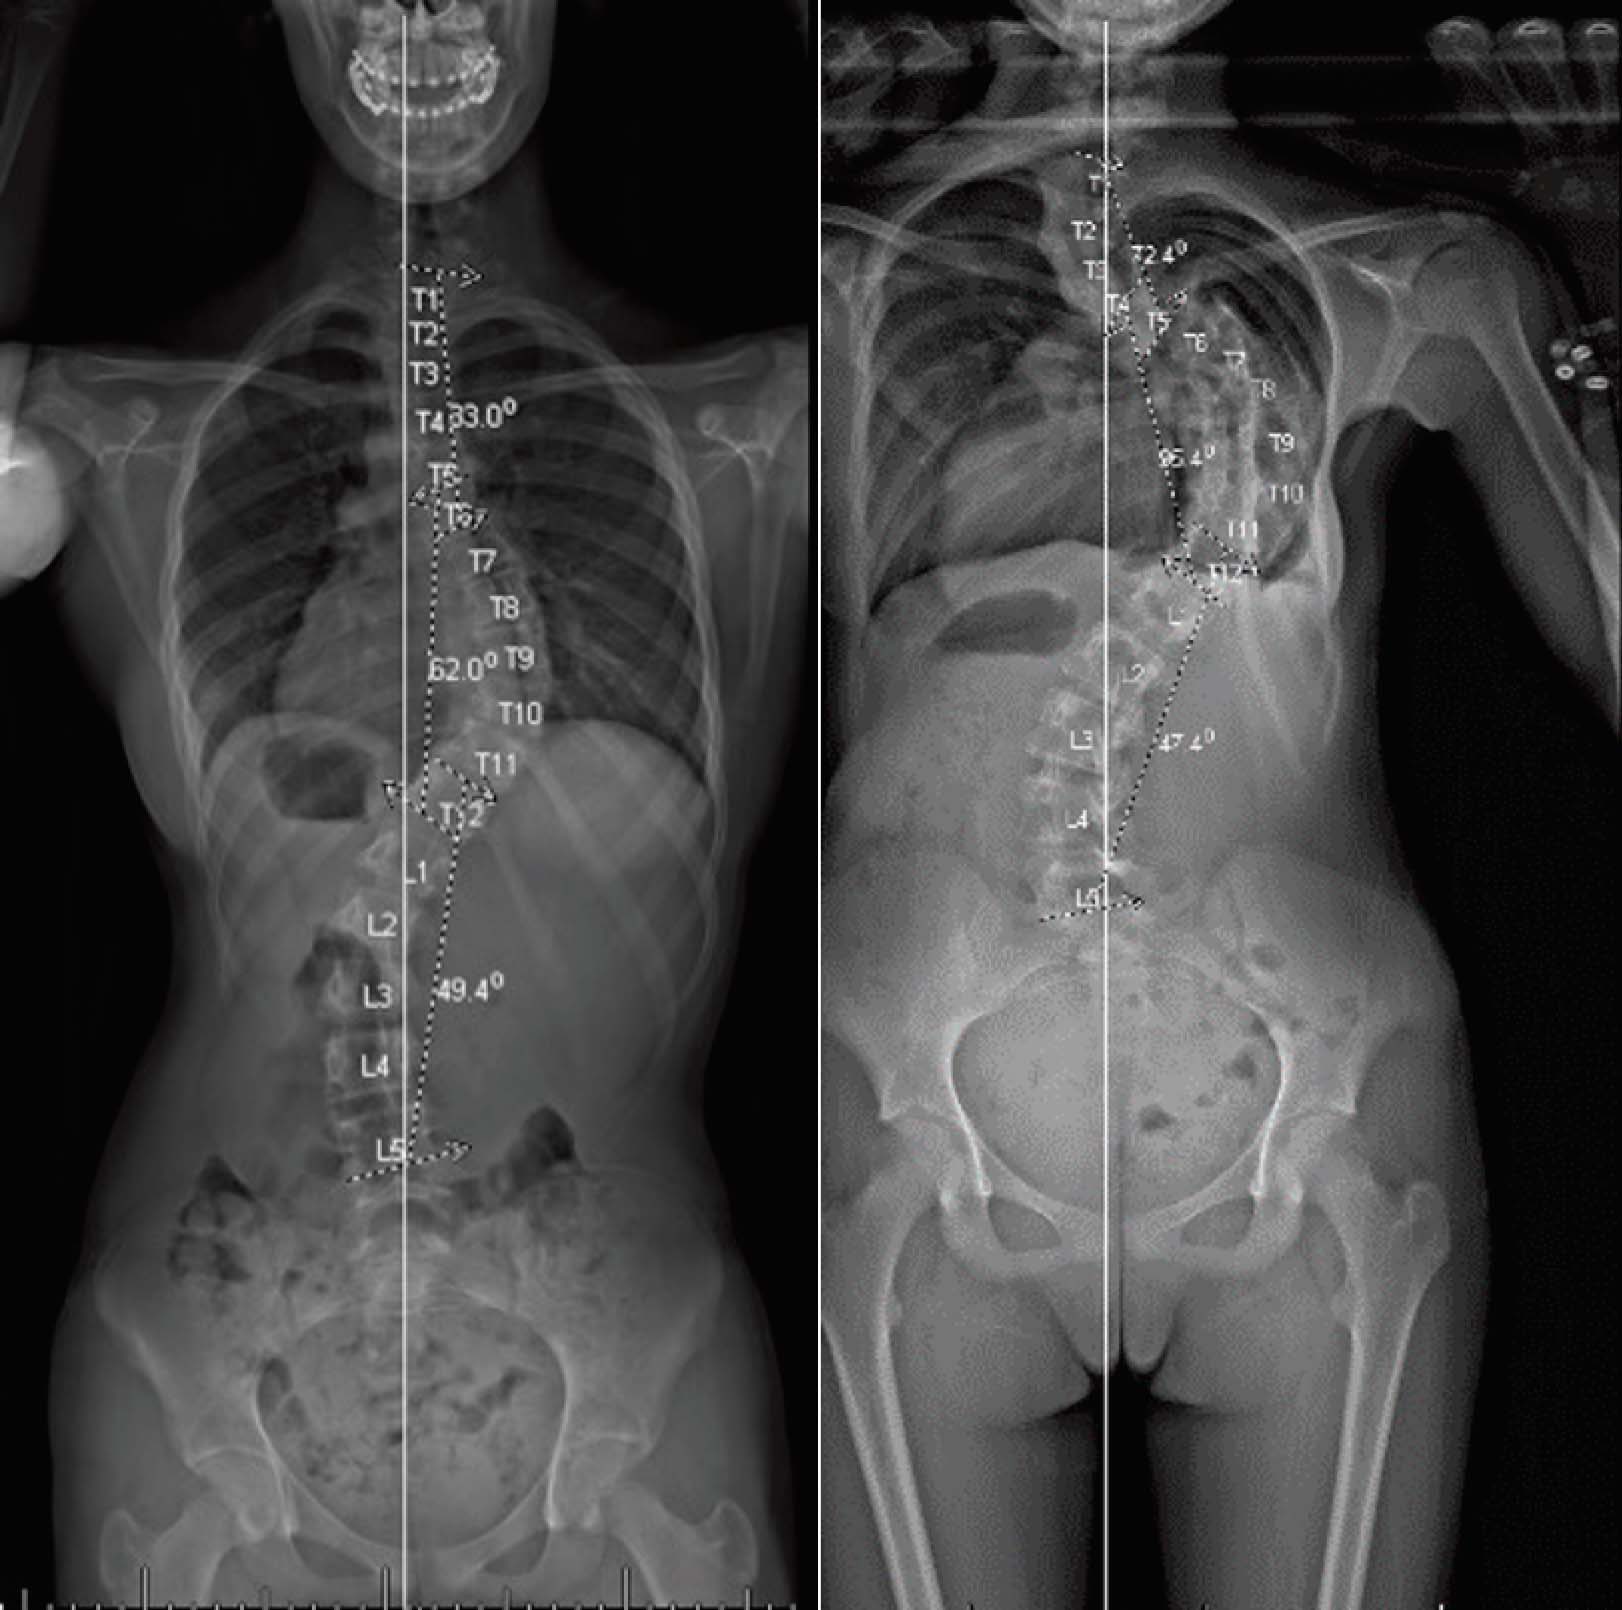 X-ray images showing scoliosis affected spines